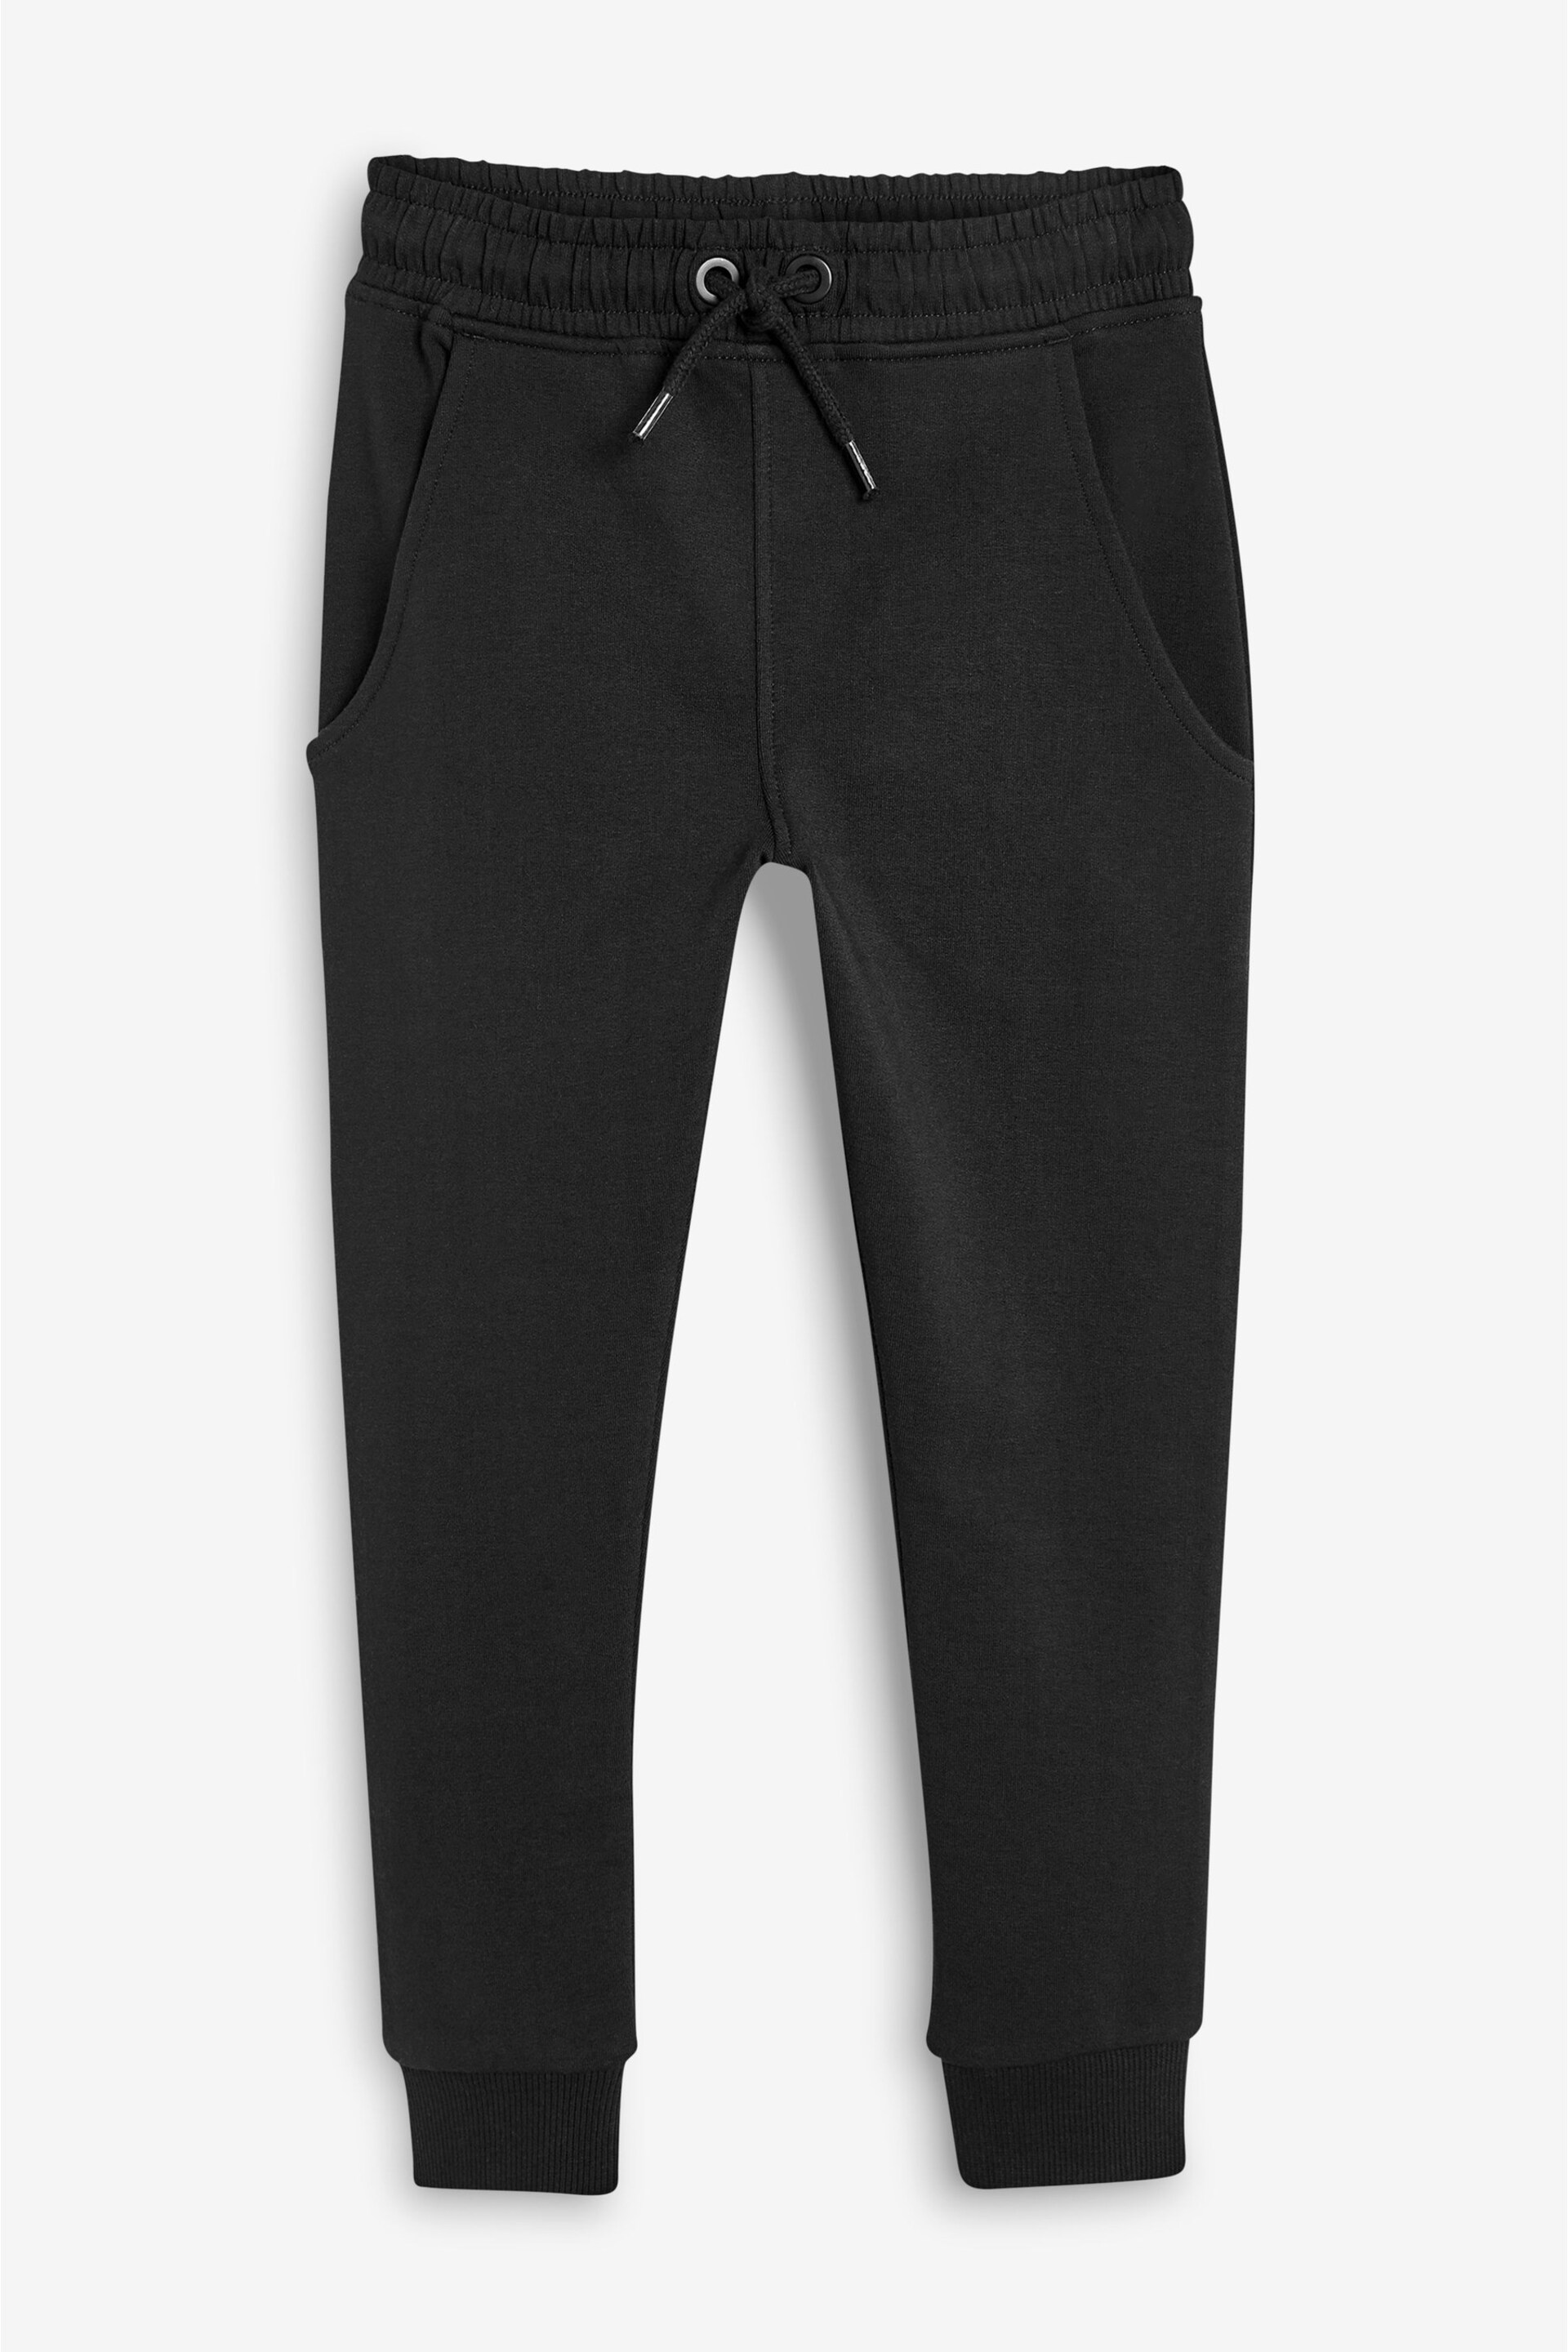 Black Skinny Fit Joggers (3-16yrs) - Image 1 of 7